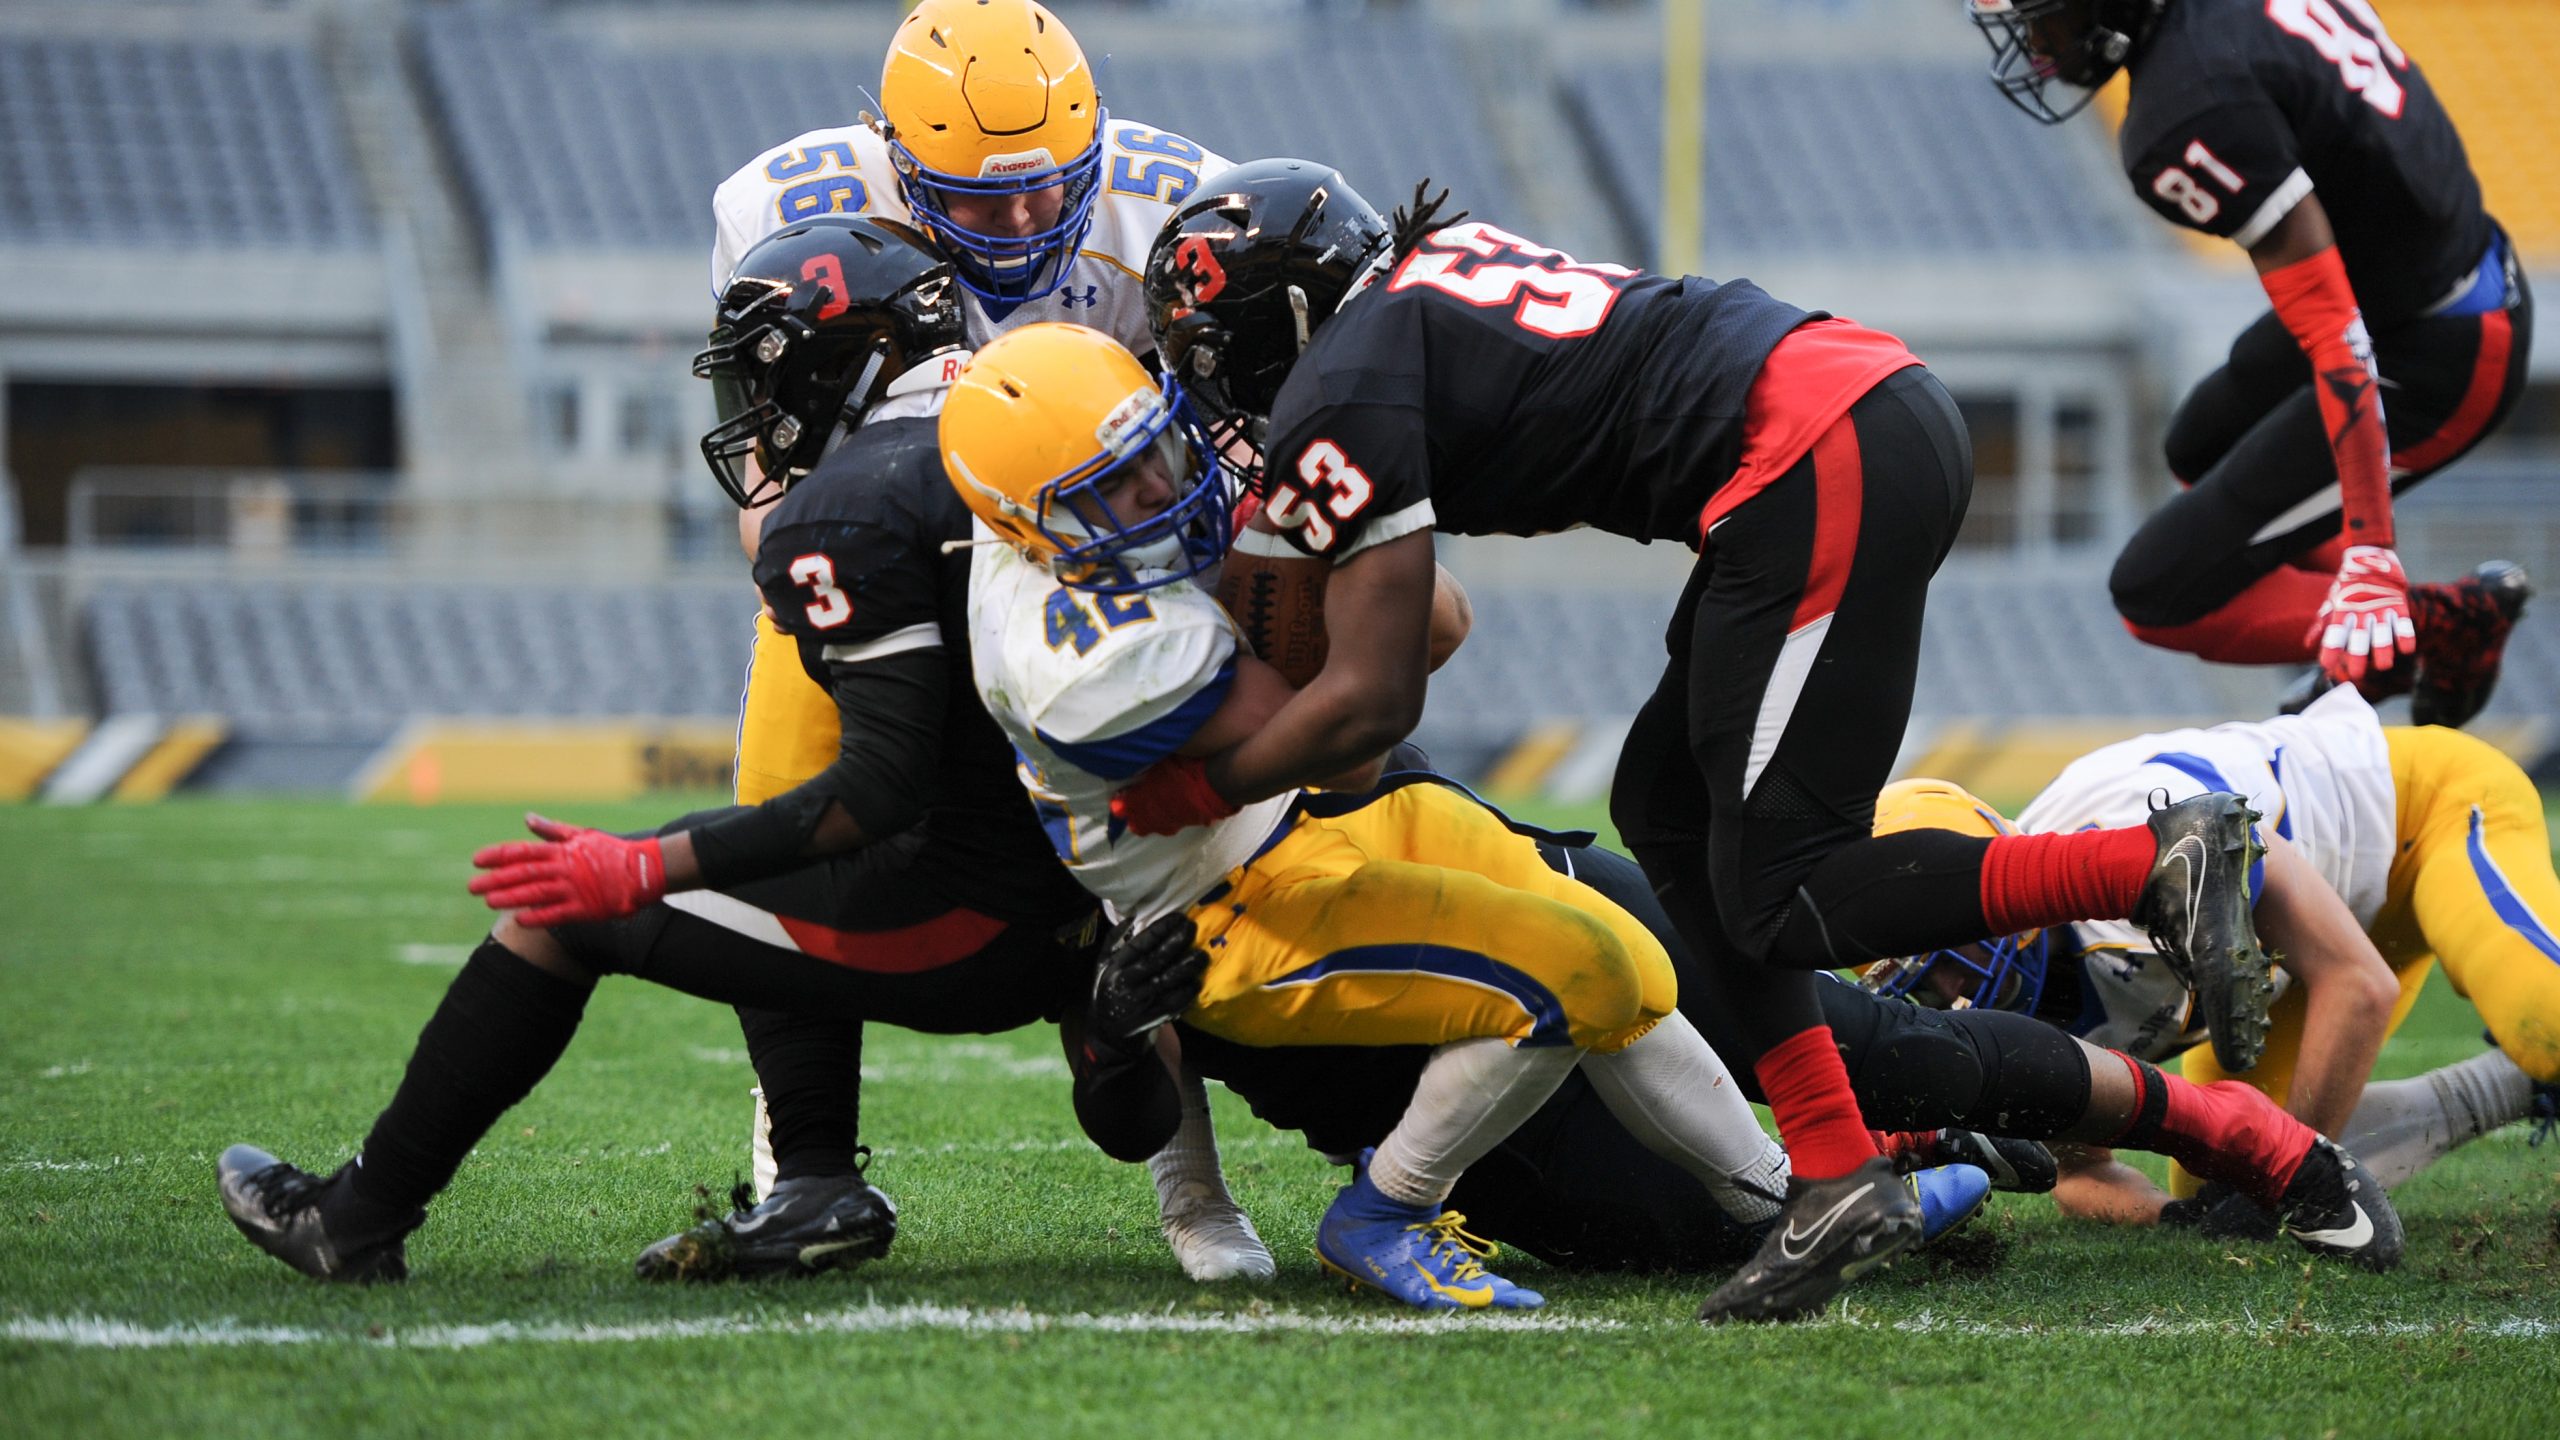 Game action from a WPIAL Championship game at Acrisure Stadium